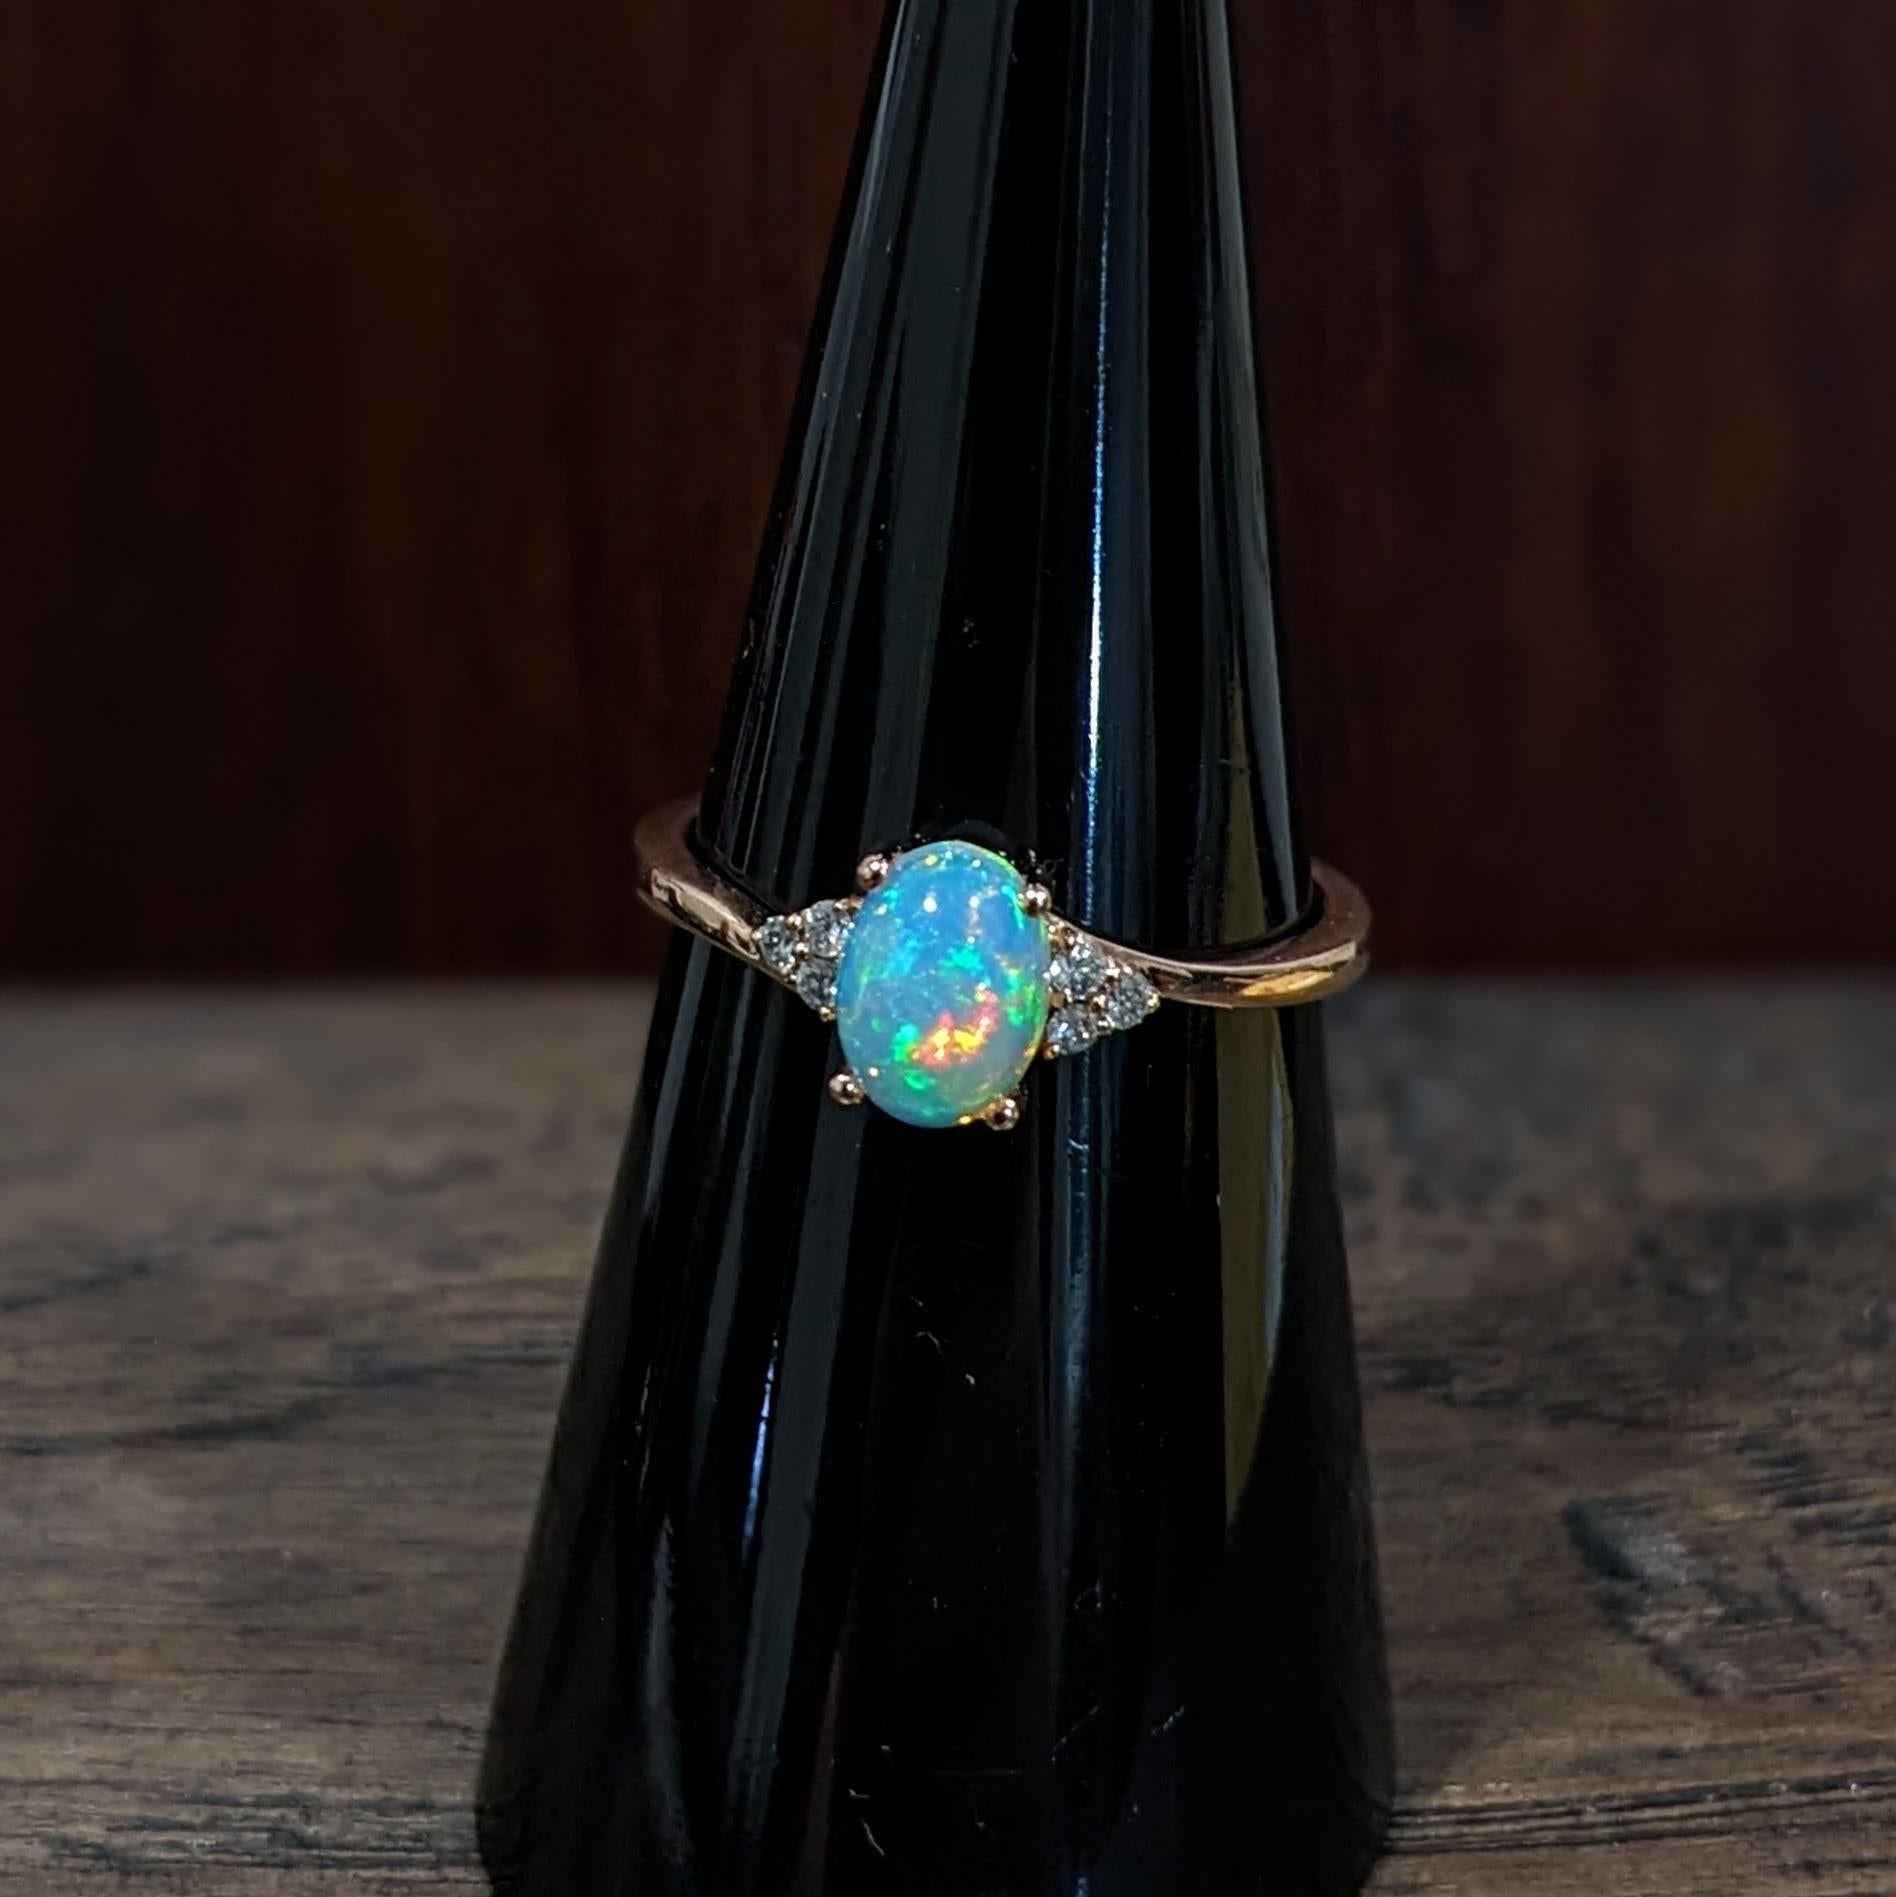 This lovely opal has all the colors of the rainbow, accented with natural earth mined diamonds set in 14k yellow gold. An elegant bypass ring design makes this glowing oval ring perfect for the modern bride or that special someone in your life! This